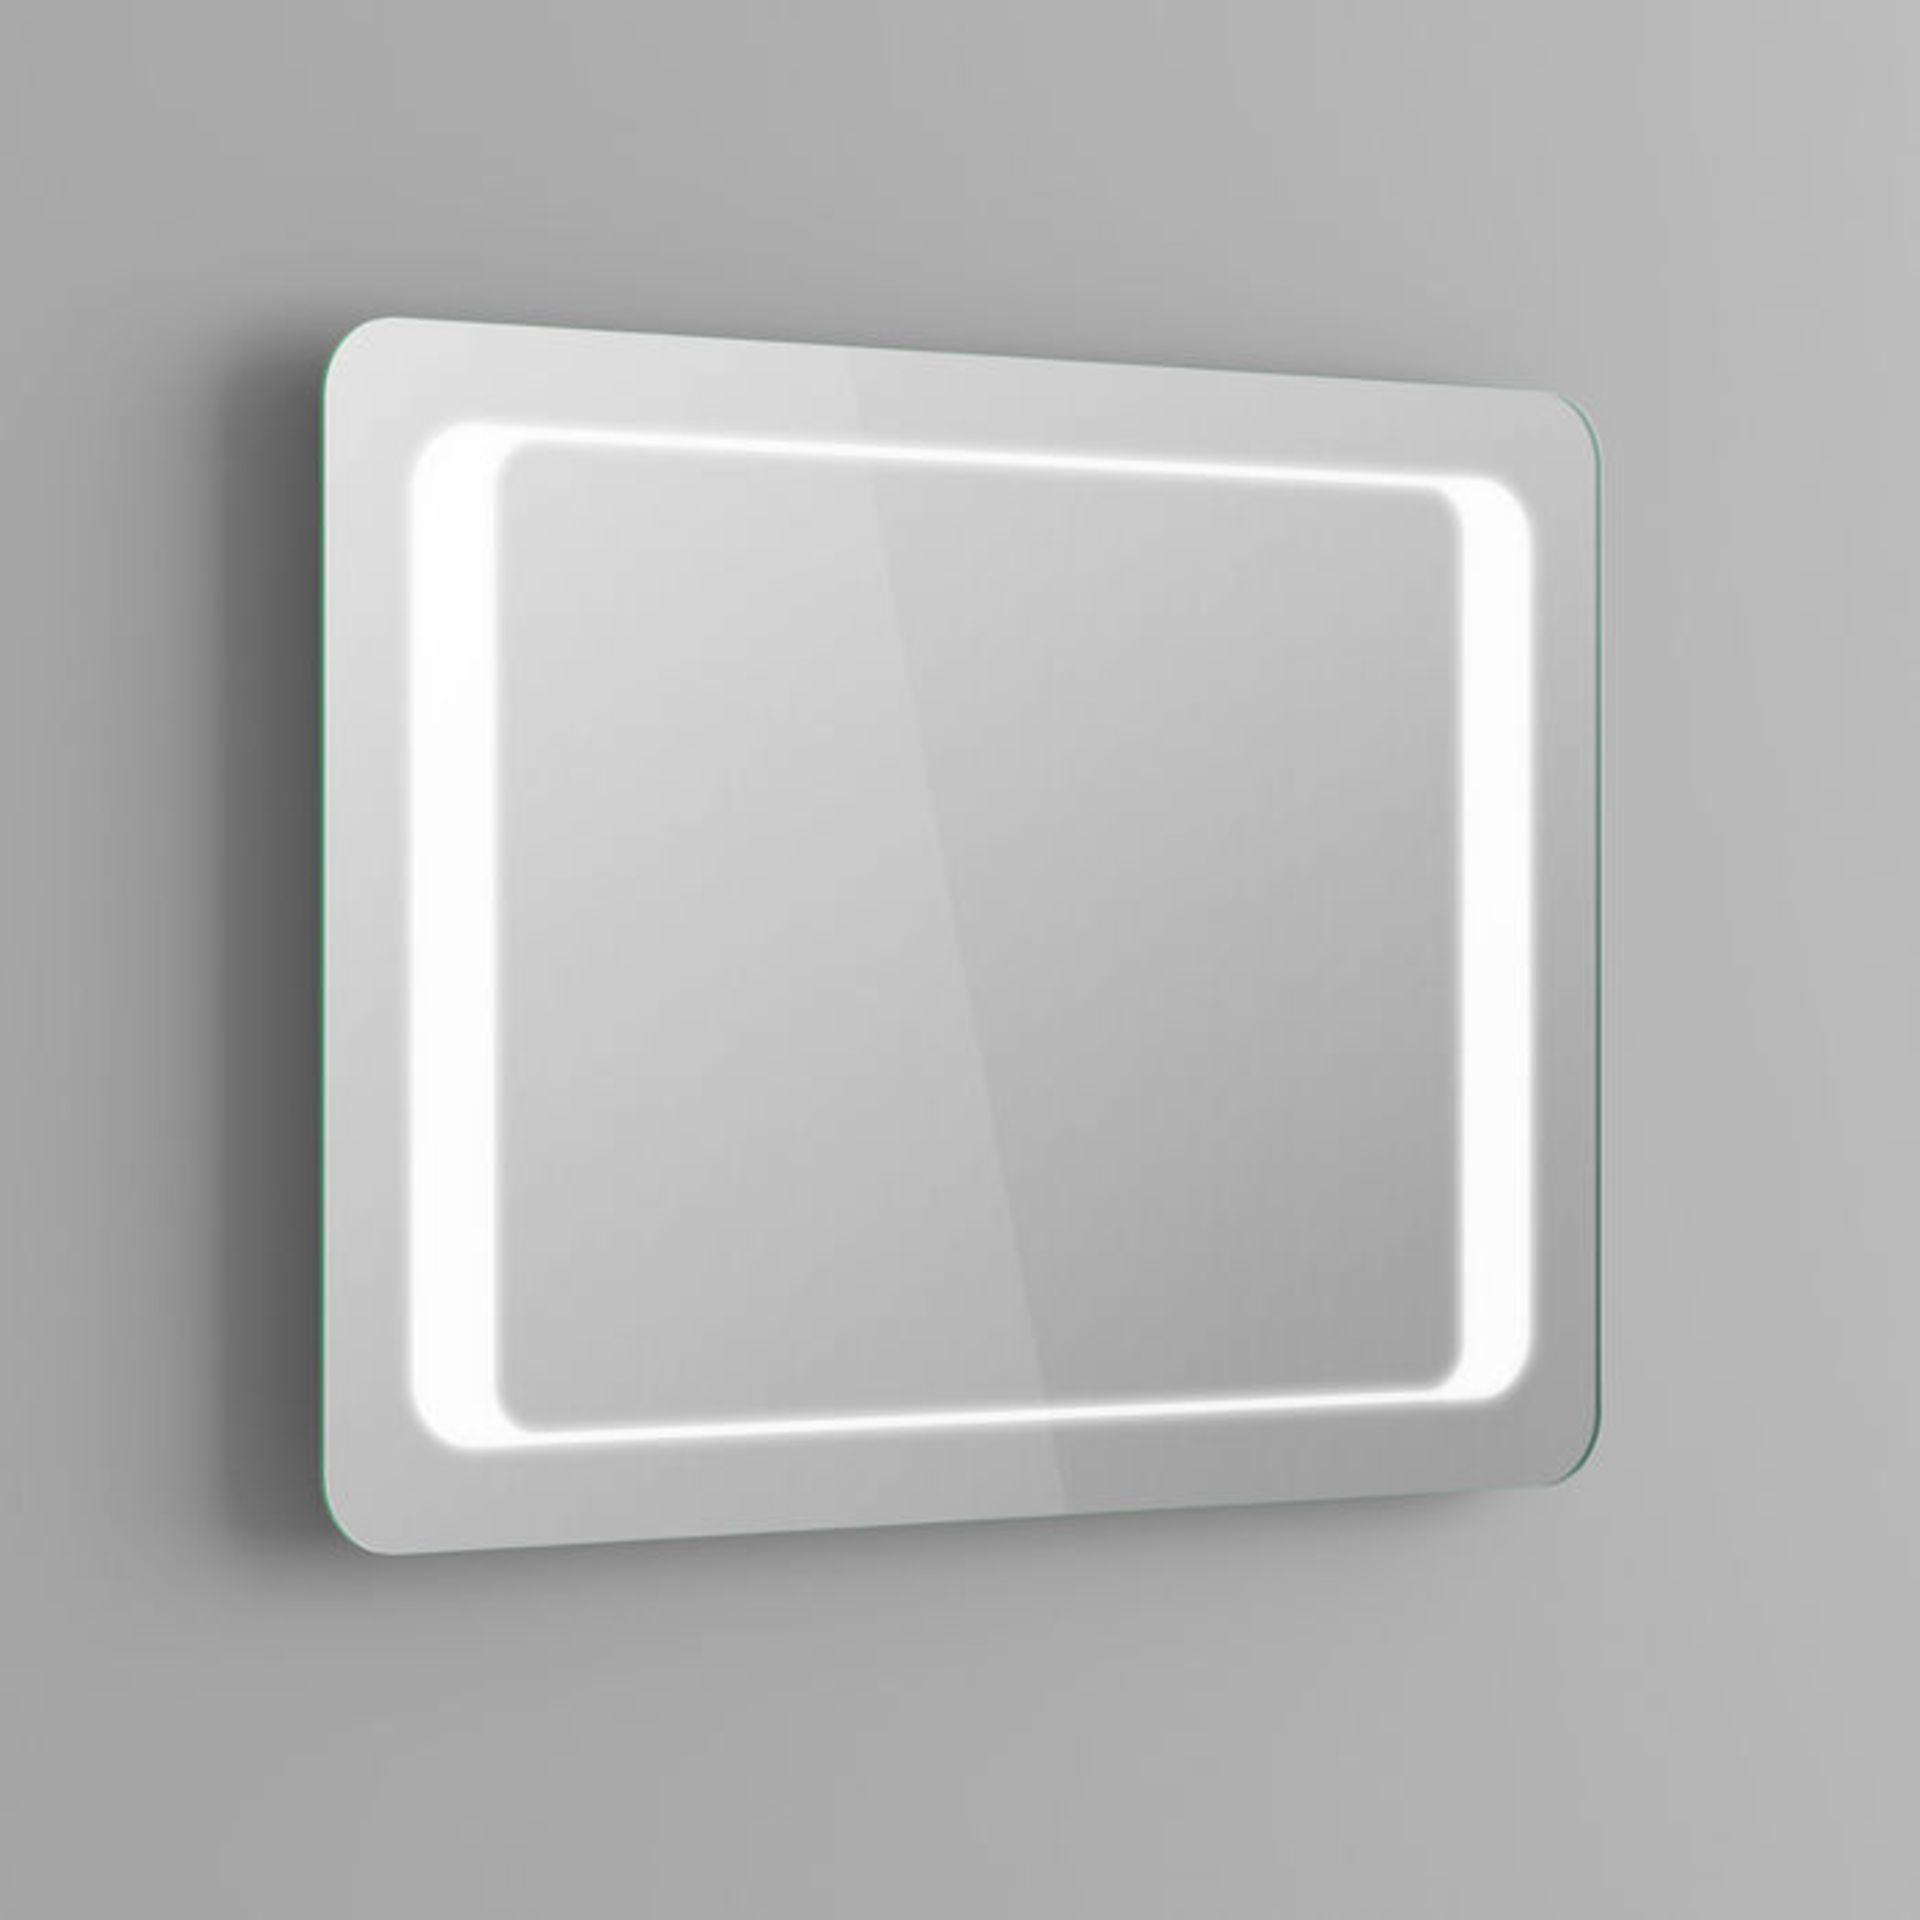 (Y57) 800x600mm Quasar Illuminated LED Mirror. RRP £349.99. Energy efficient LED lighting with - Image 9 of 9